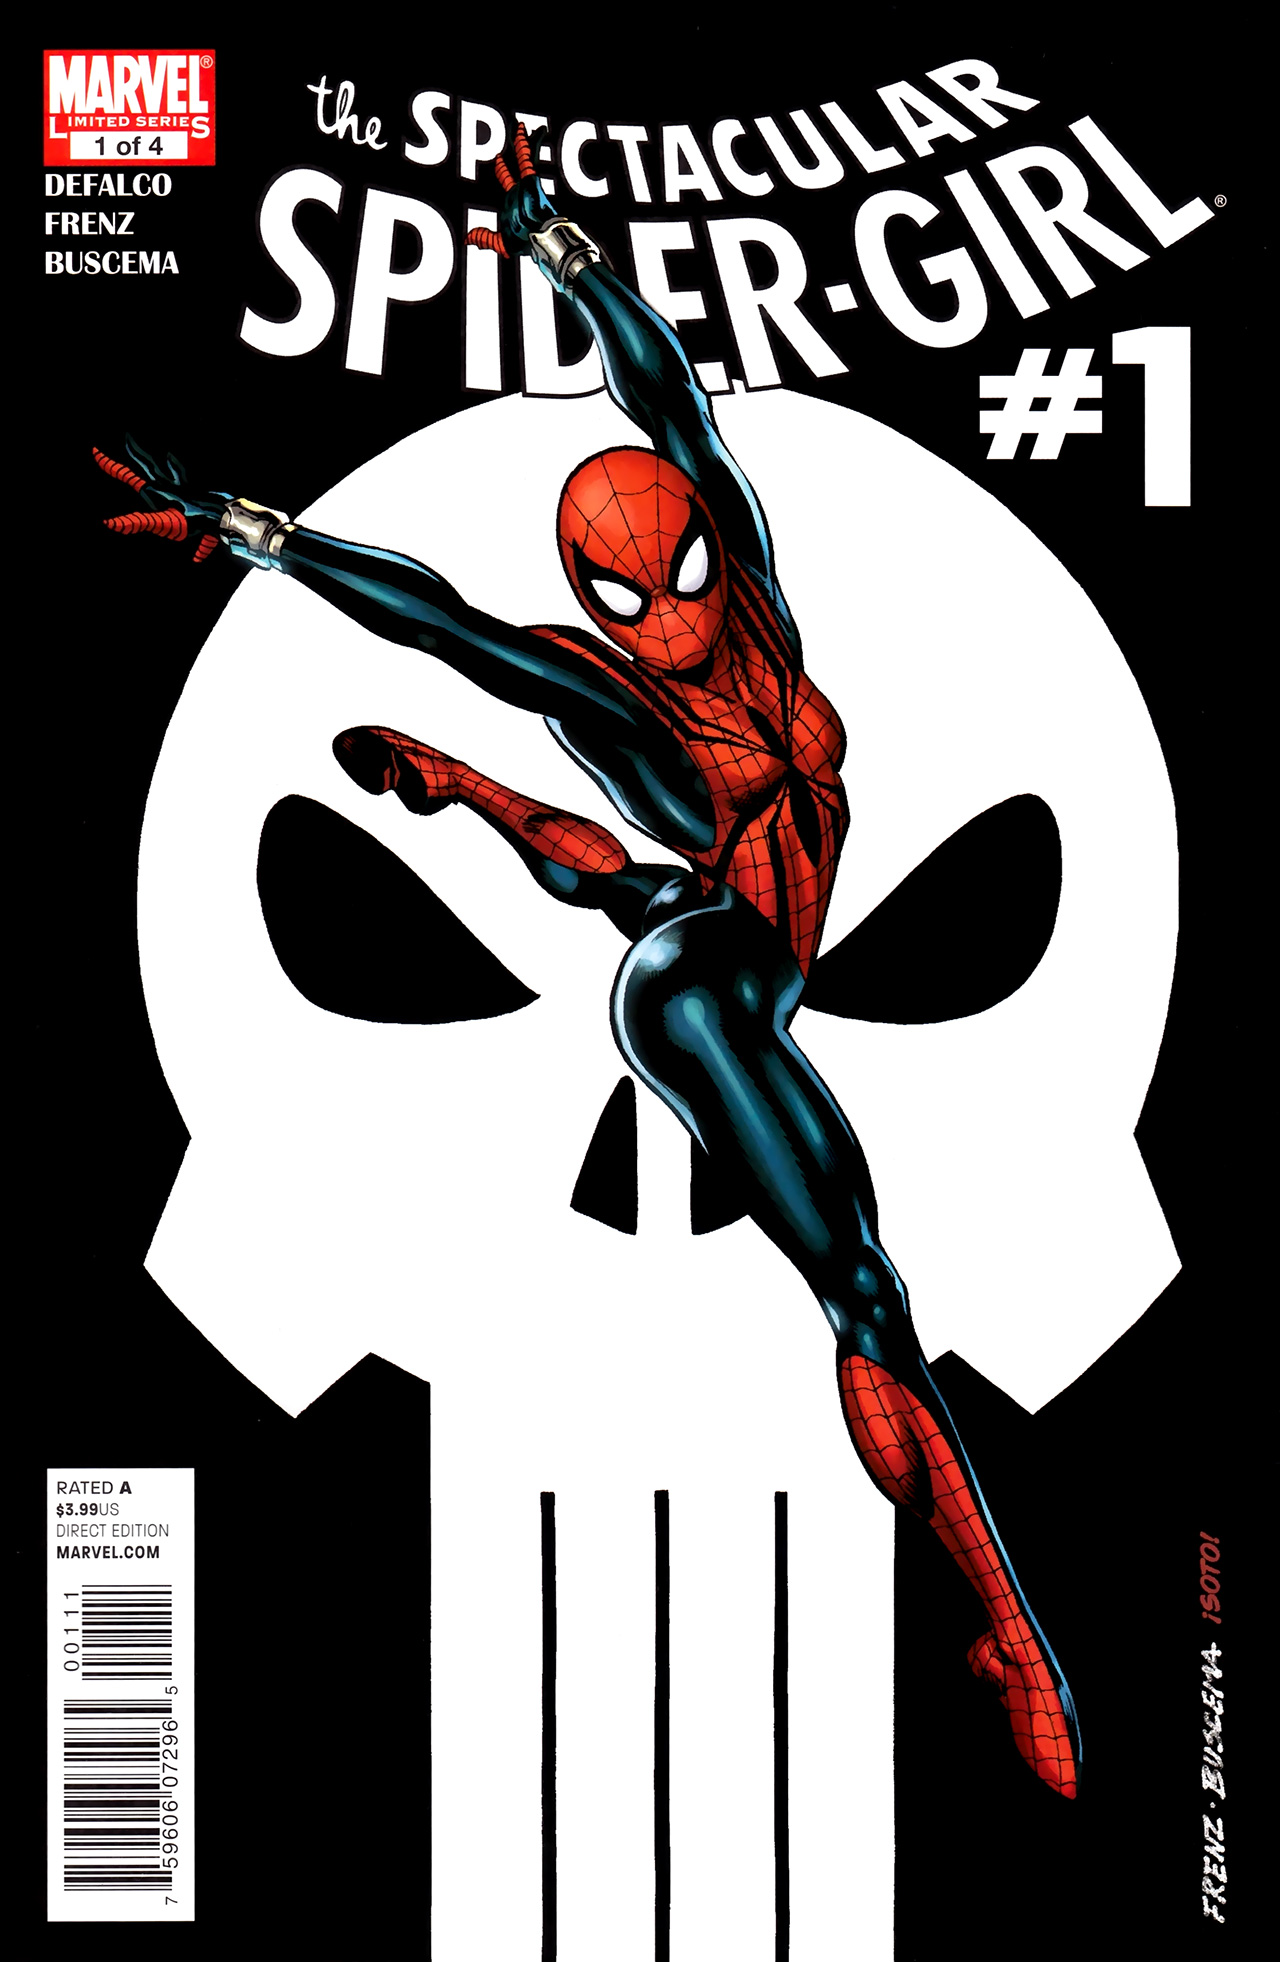 Read online Spectacular Spider-Girl comic -  Issue #1 - 1